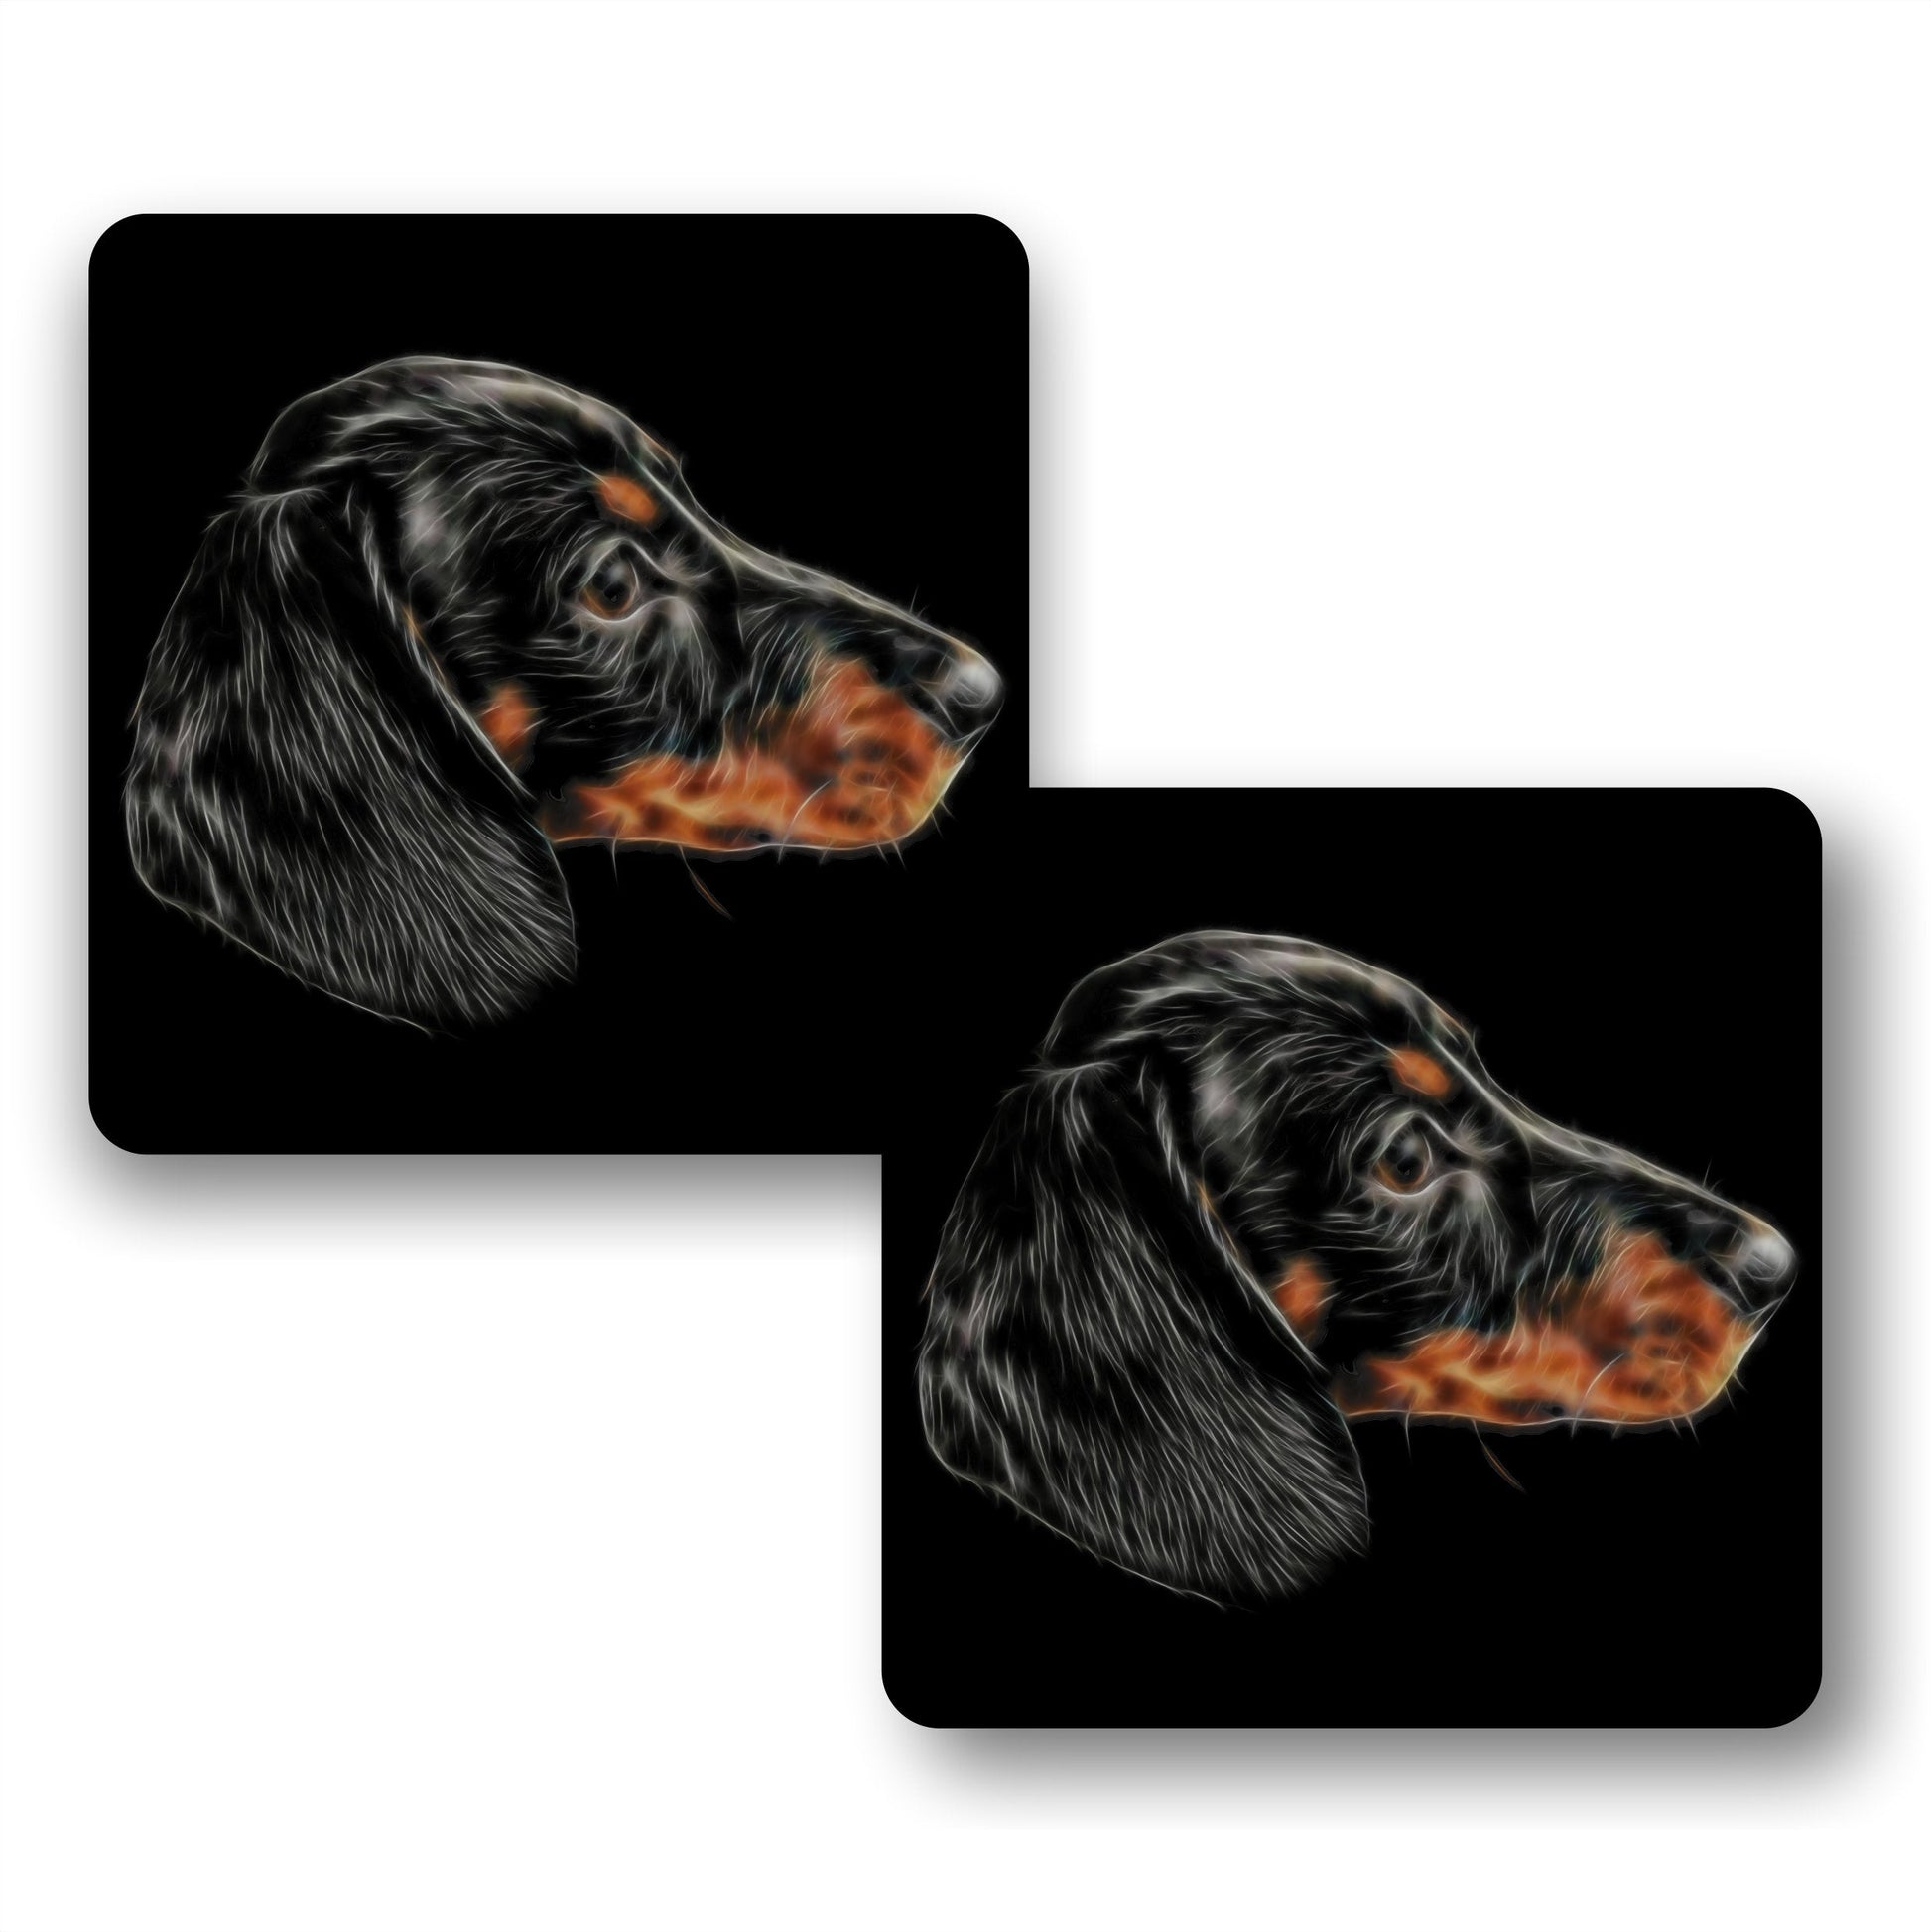 Black and Tan Dachshund Coasters, Set of 2, with Stunning Fractal Art Design